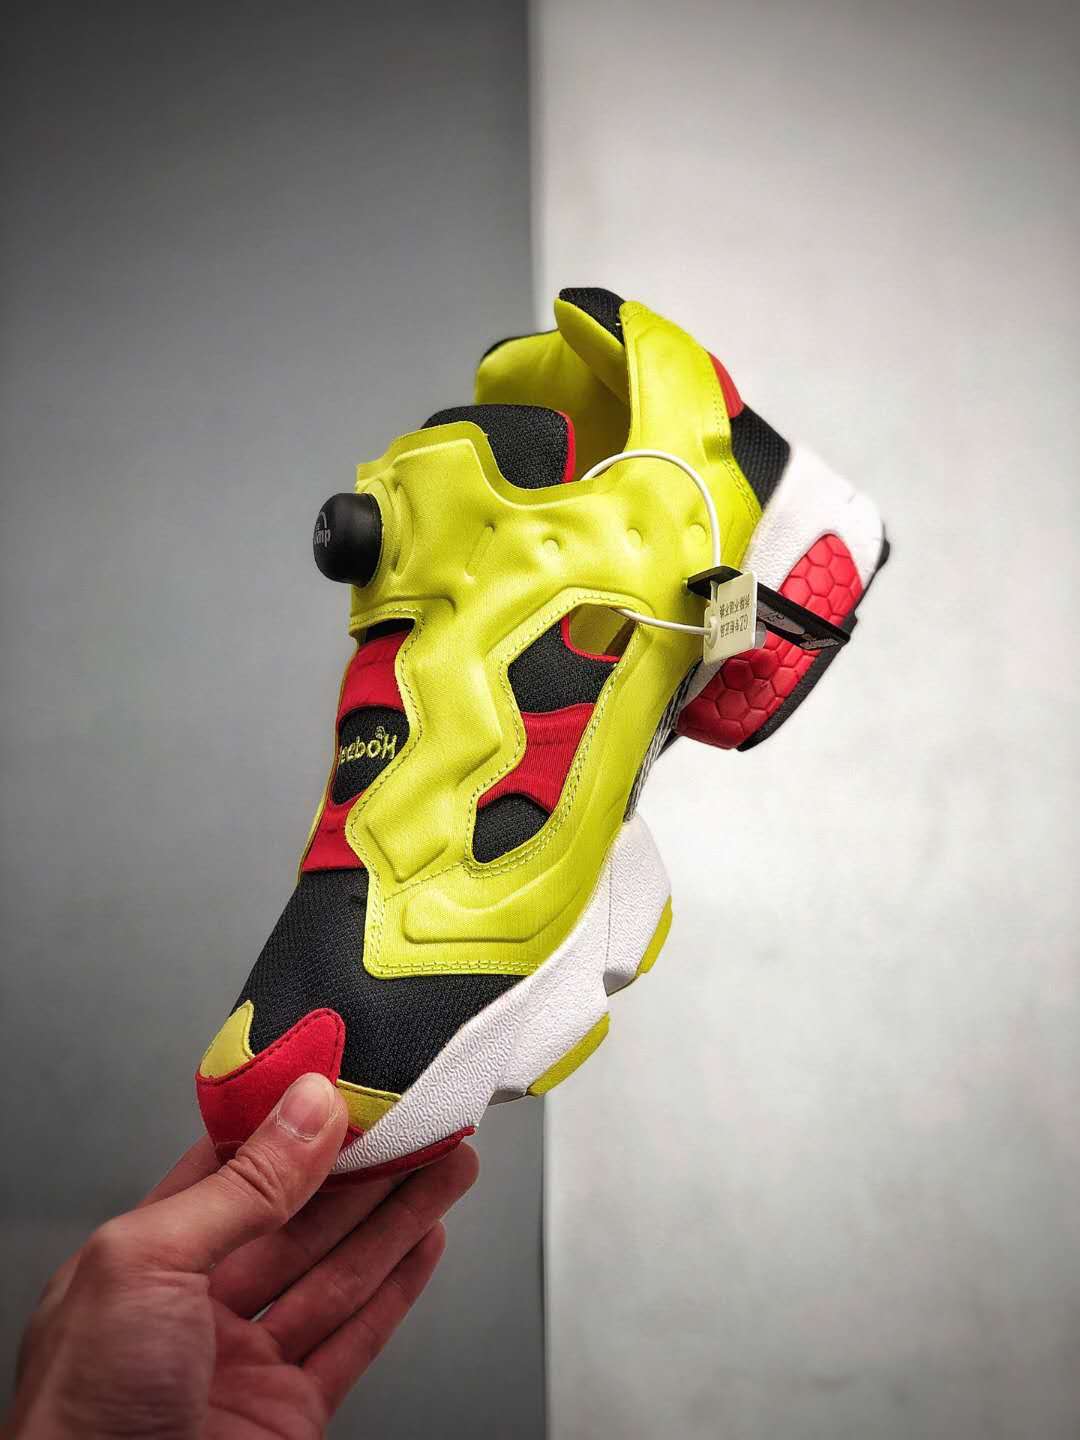 Reebok InstaPump Fury OG Retro 'Citron' 2019 V47514 - Stylish and Airy Athletic Sneakers